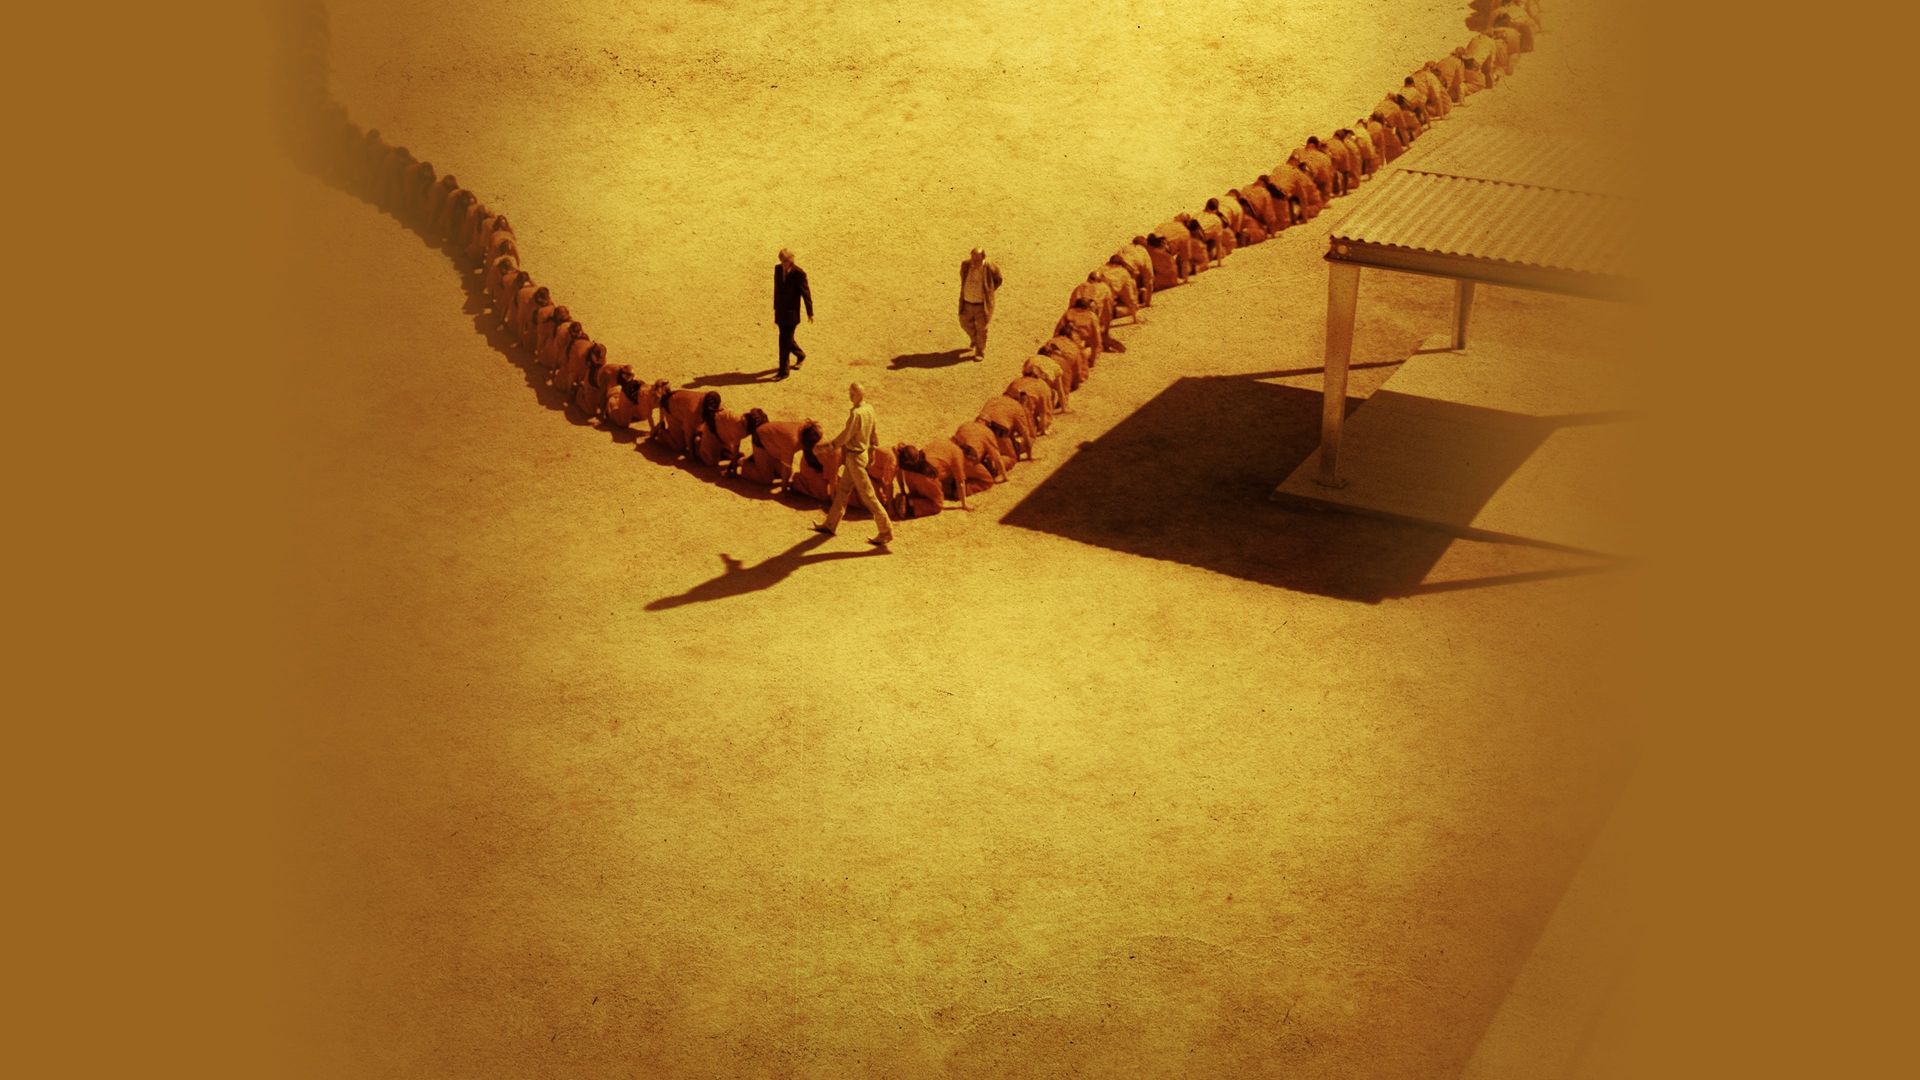 The Human Centipede III (Final Sequence) background